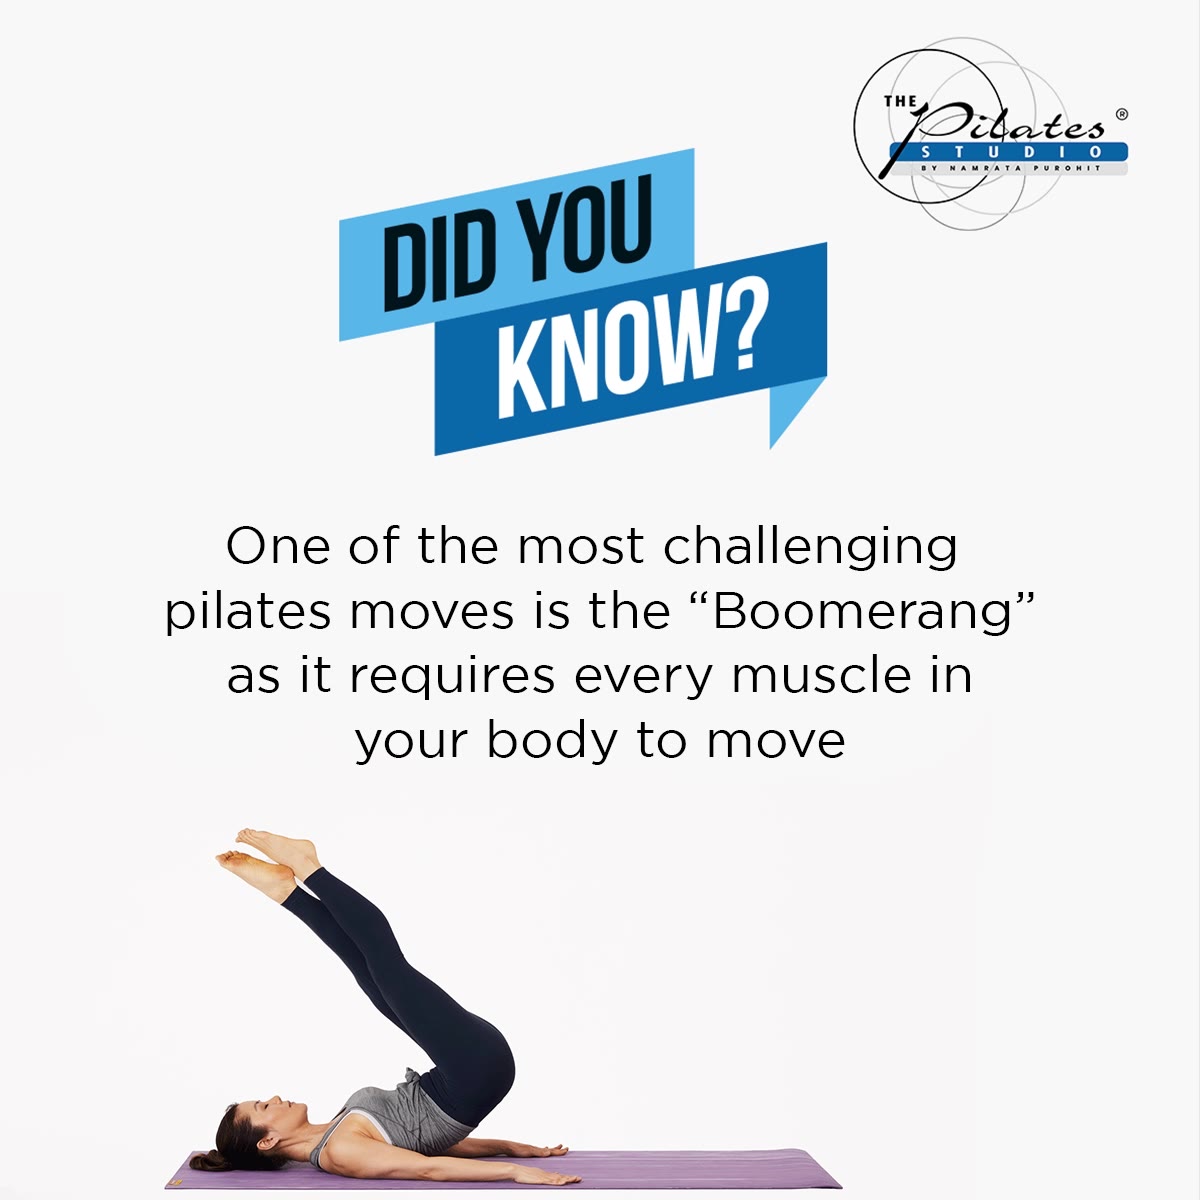 #DidYouKnow: Boomerang is an advanced Pilates mat exercise that comes near the end of the classical Pilates mat sequence. It is an opportunity to put many skills together in one flowing sequence of moves. Teaser and roll over are part of this exercise, and it involves the kind of abdominal muscle control that you call on in other exercises such as rolling like a ball.

Be sure to have the choreography well in mind before you start. Breath and flow make the Pilates boomerang a joy near the end of your workout.
.
.
Dm us for queries.
www.pilatesaltitude.com
.
.
. 
#Pilates #PilatesCommunity #Fitness #FitnessEnthusiasts #HealthTips #EatHealthy #Stretch #WorkOut #ThePilatesStudio #Graceful #Relax #FitnessMotivation #InstaFit #StottPilates #FitnessStudio #Fitspo 
#ThePilatesStudio #Strength #pilates #PilatesGirl  #Workout #WorkoutMotivation #fitness #Exercise  #WorkoutChallenge